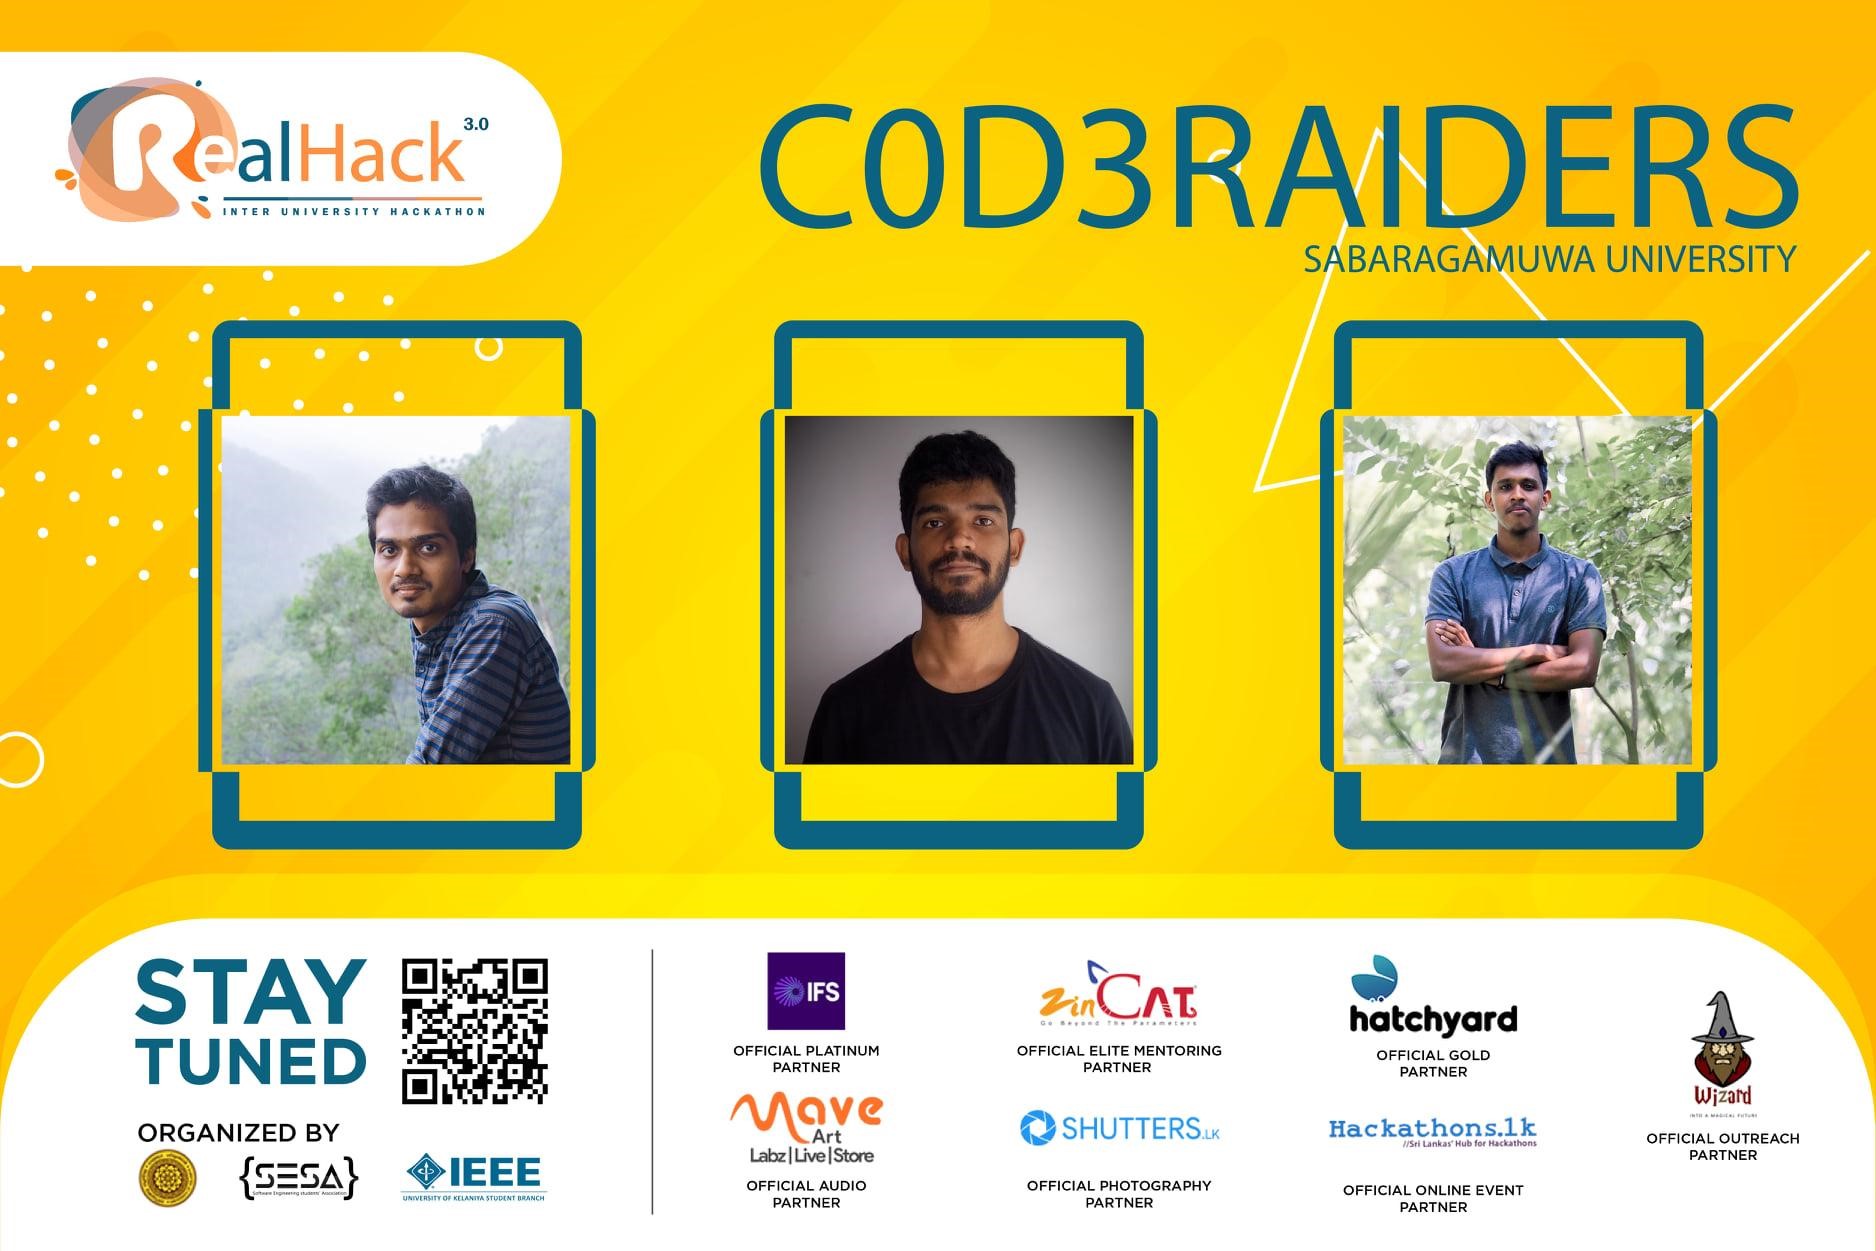 Team C0D3RAIDERS - Finalists at RealHack 3.0